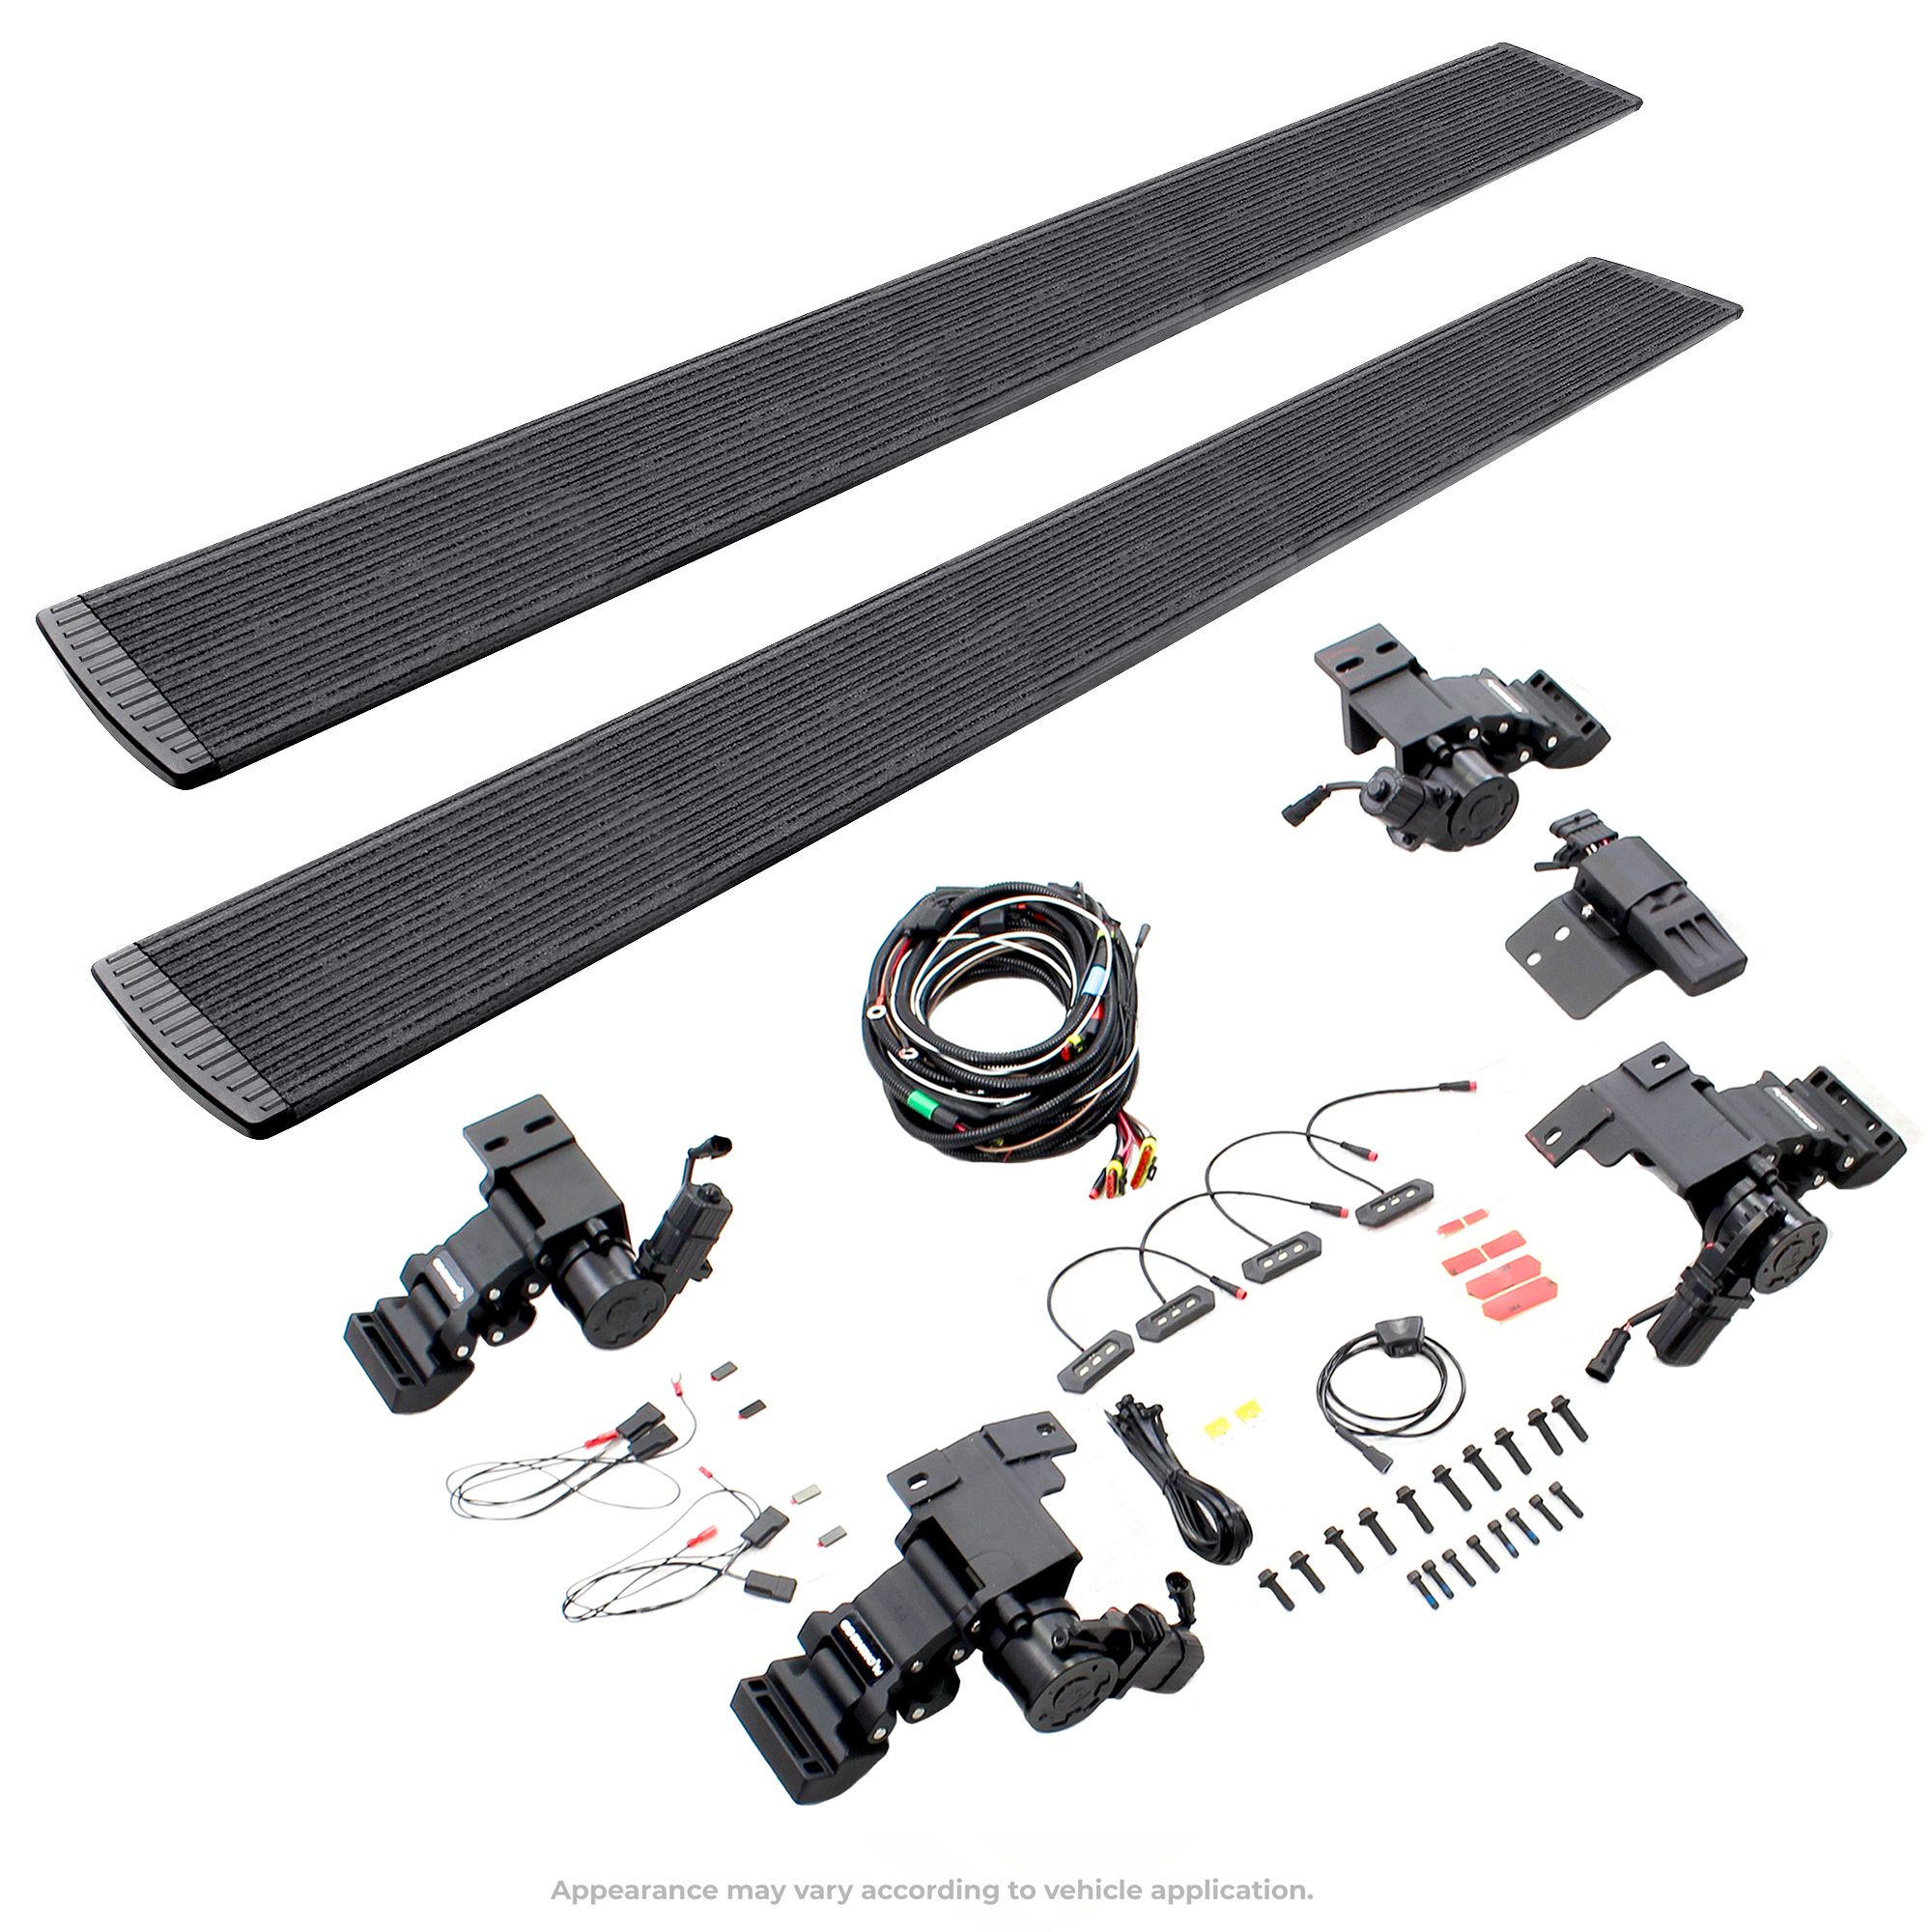 Go Rhino 20415987T - E1 Electirc Running Boards With Mounting Brackets - Protective Bedliner Coating